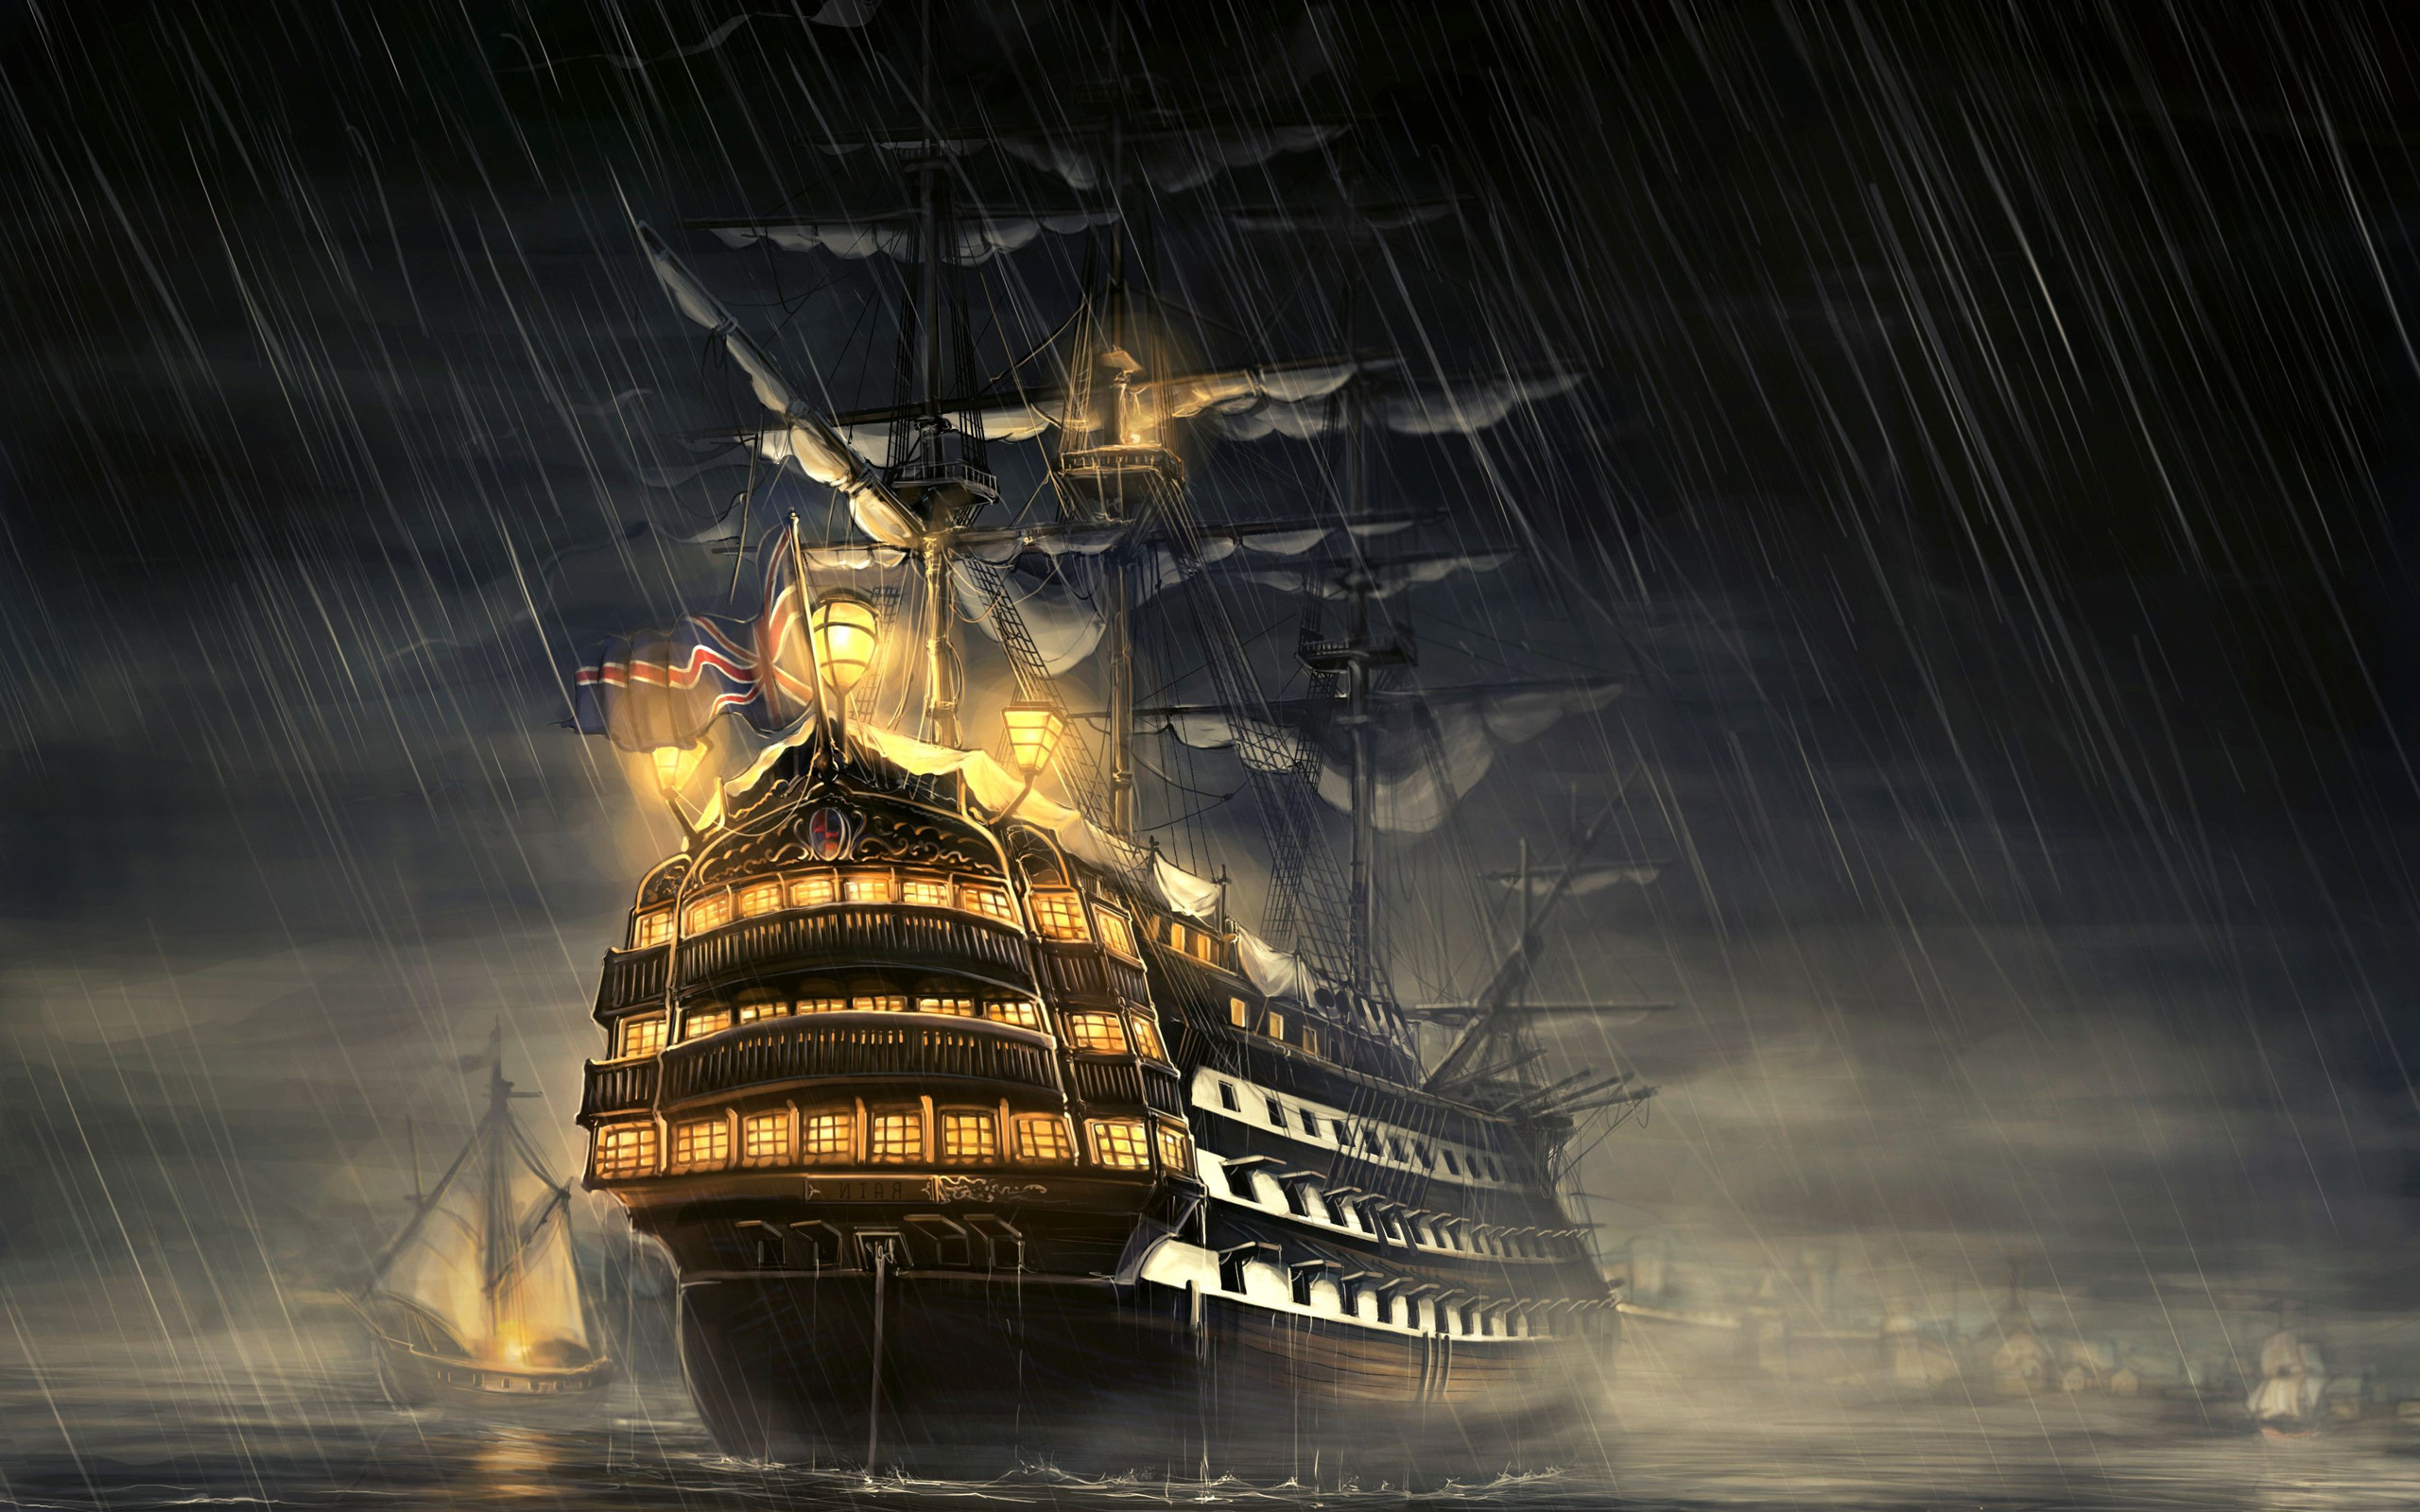 2560x1600 Find out: Pirate Ship wallpaper on http://hdpicorner.com/pirate-ship/ | Desktop  Wallpapers | Pinterest | Pirate ships, Wallpaper and Ships